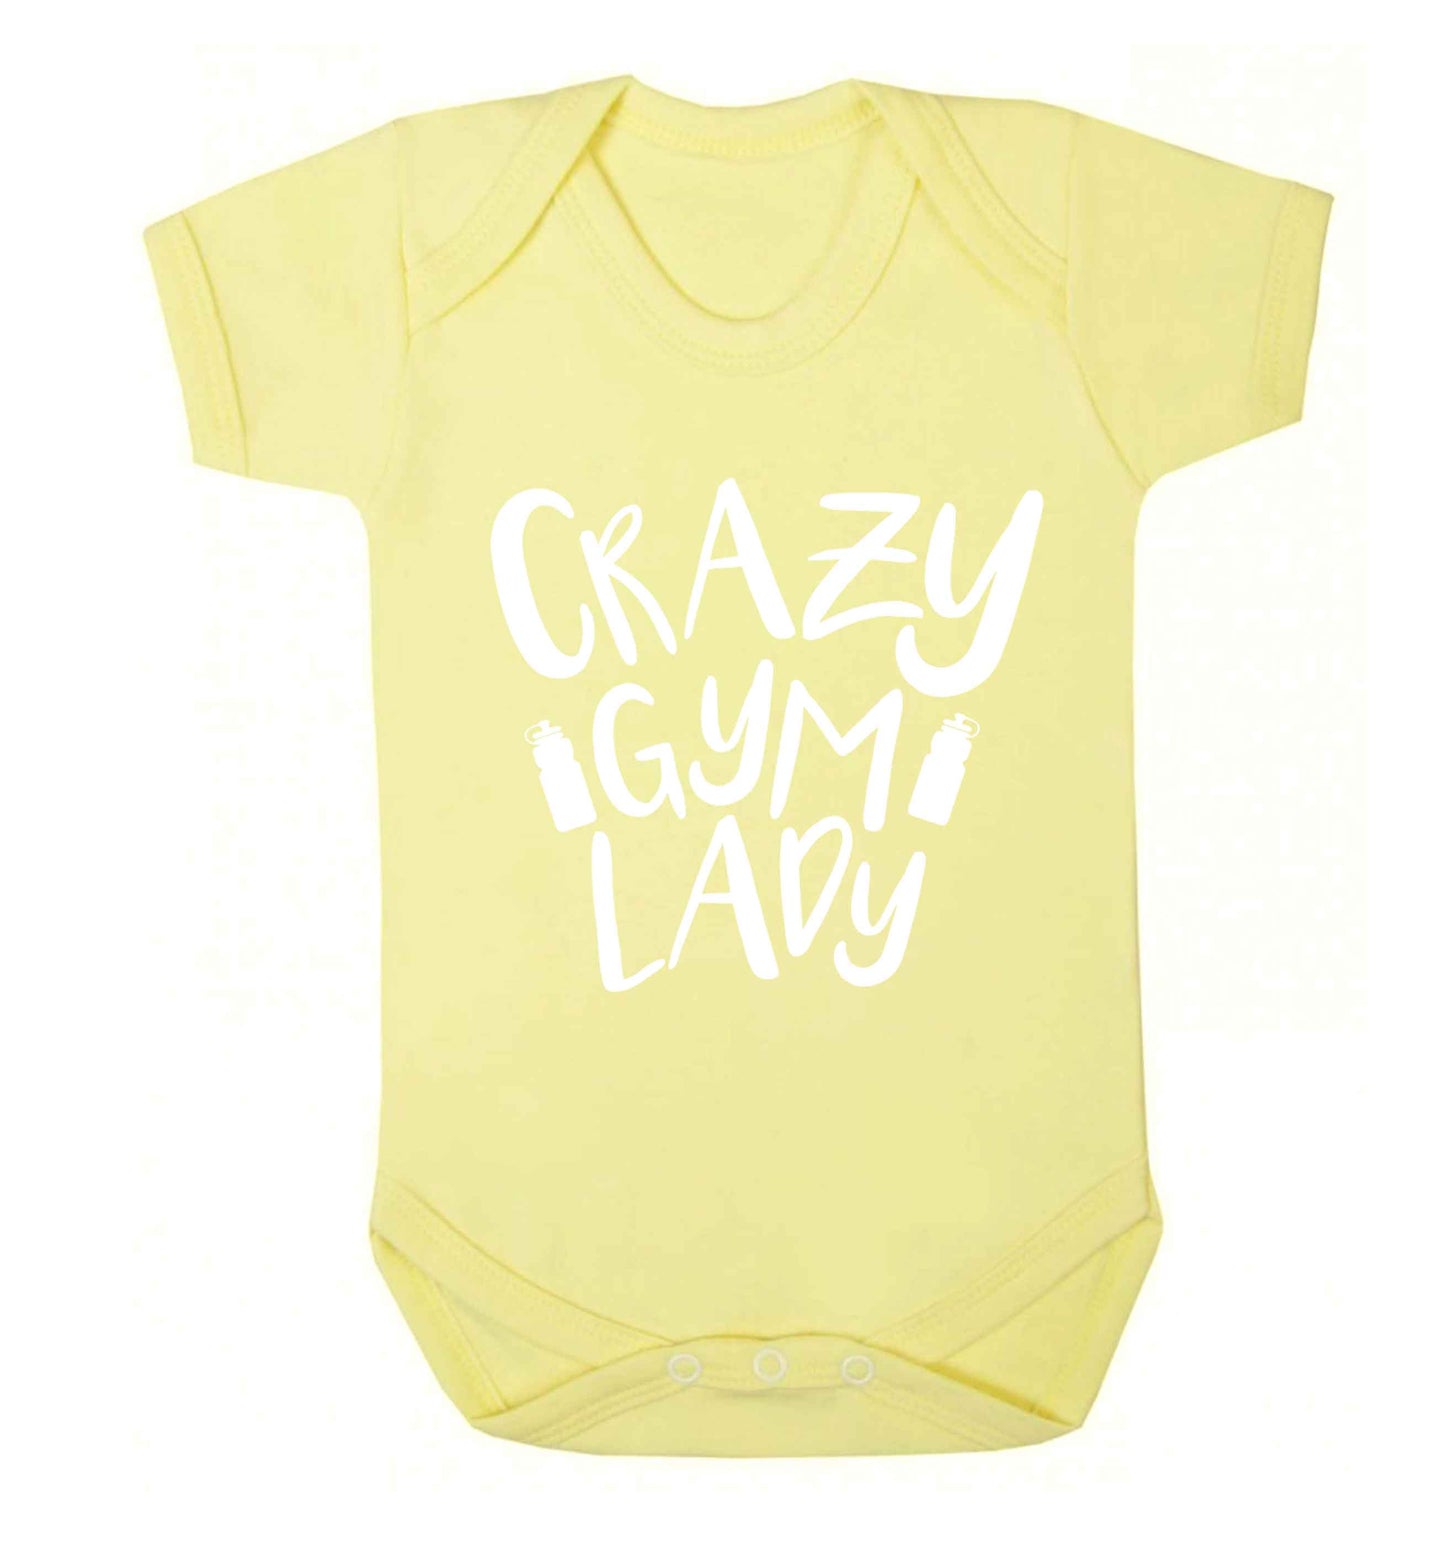 Crazy gym lady Baby Vest pale yellow 18-24 months